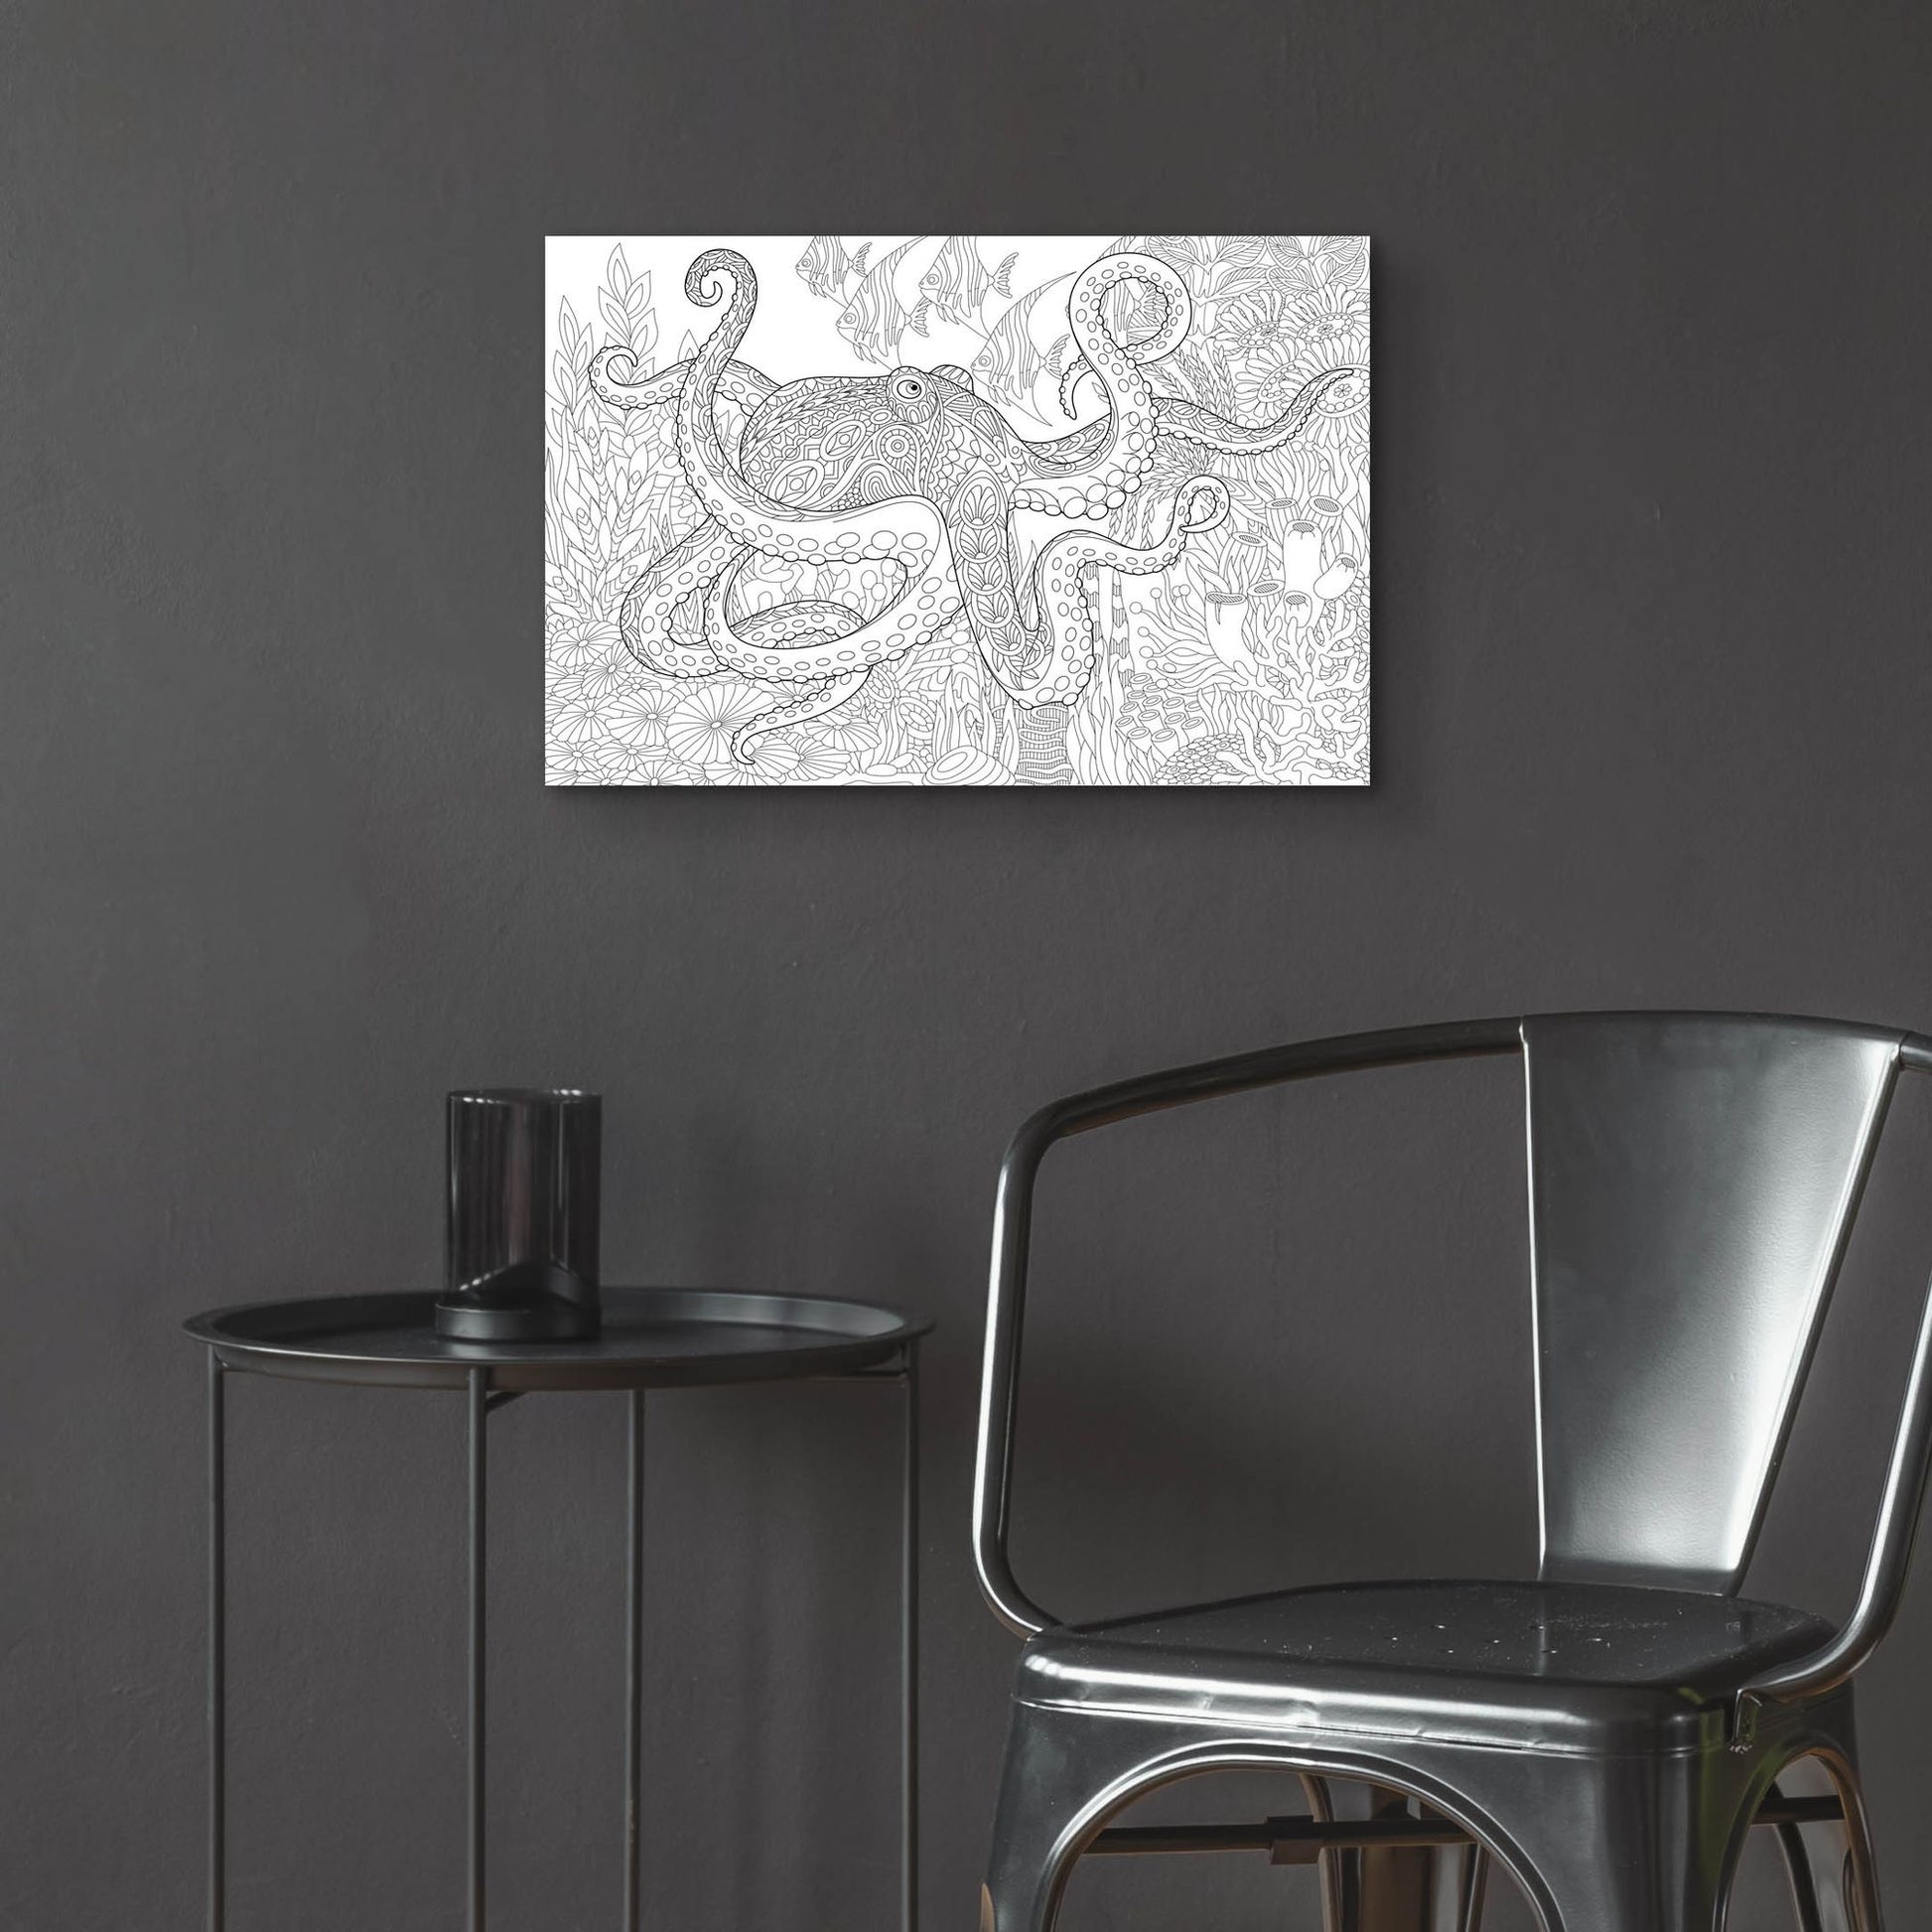 Epic Art 'Coloring Book Octopus' by Epic Portfolio, Acrylic Glass Wall Art,24x16